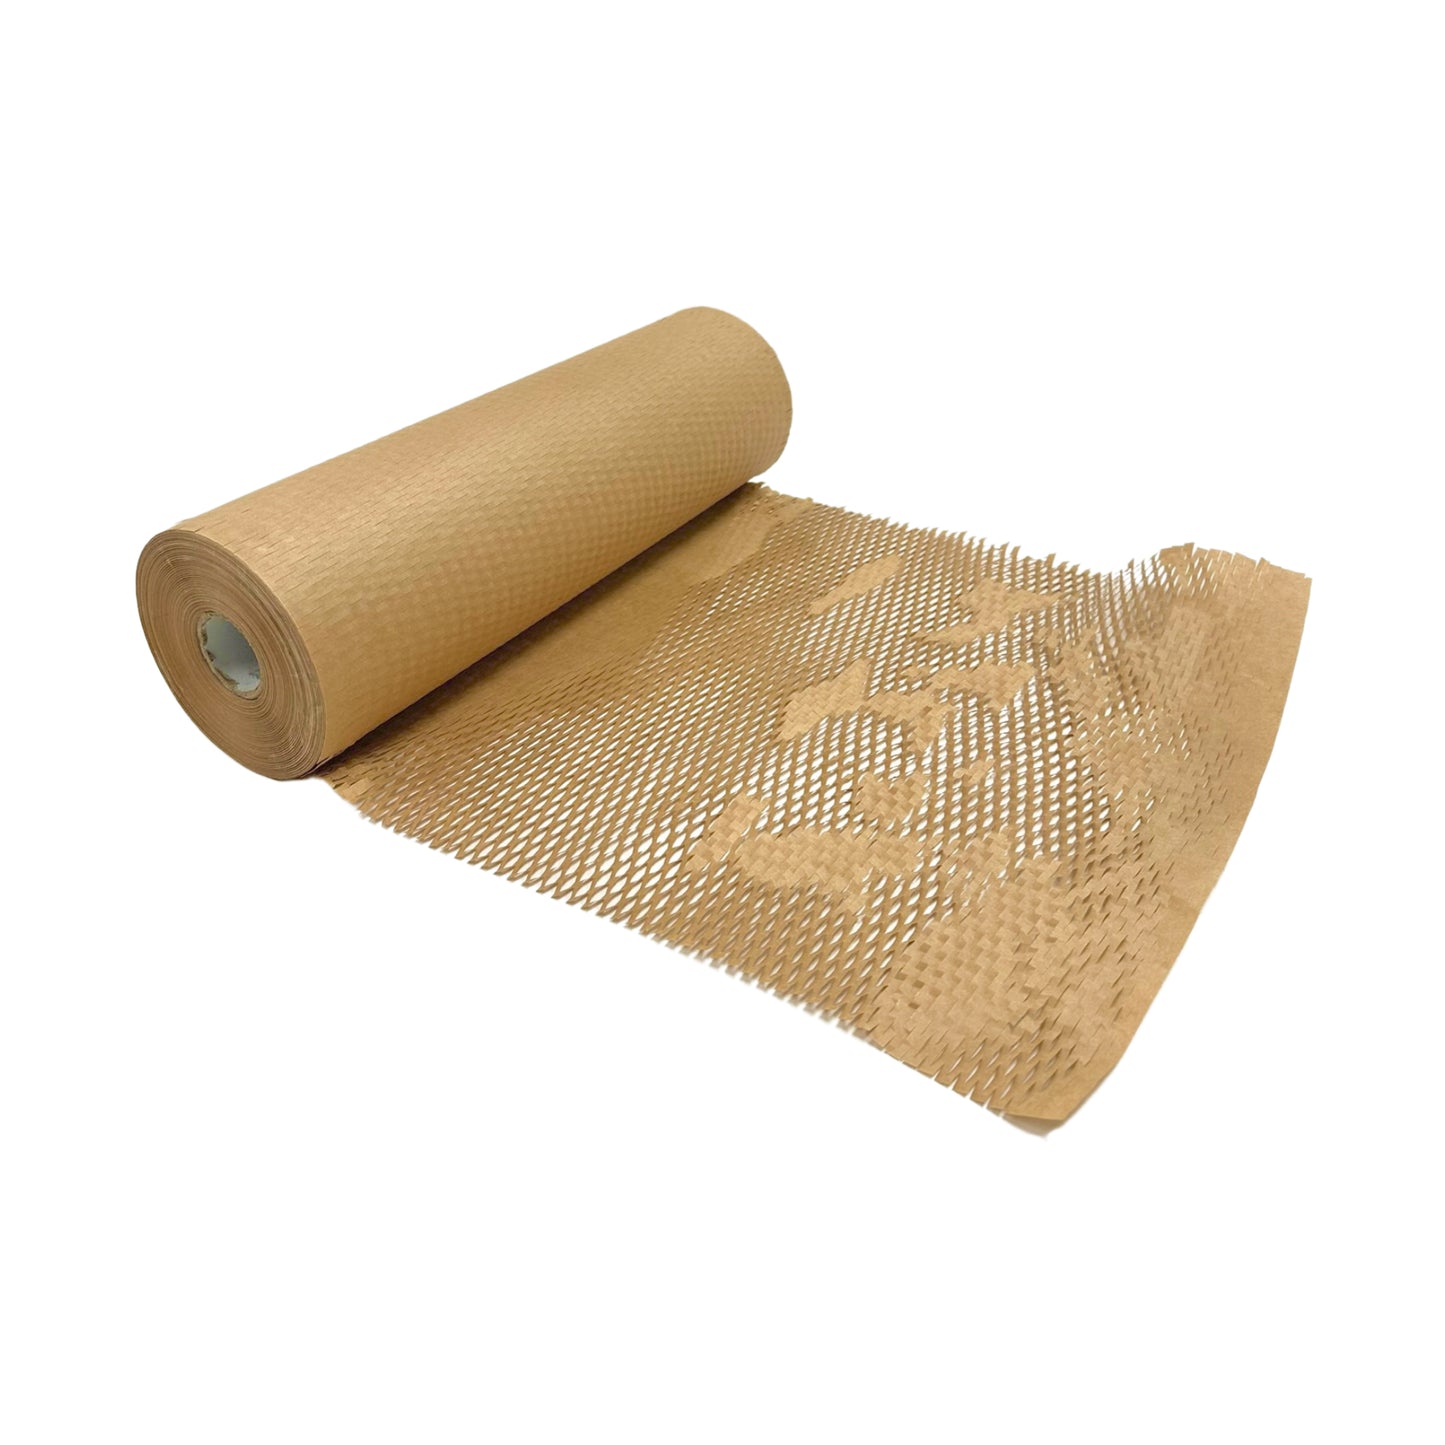 1pcs, Honeycomb, 15x3580 inches, Wrapping Paper Roll